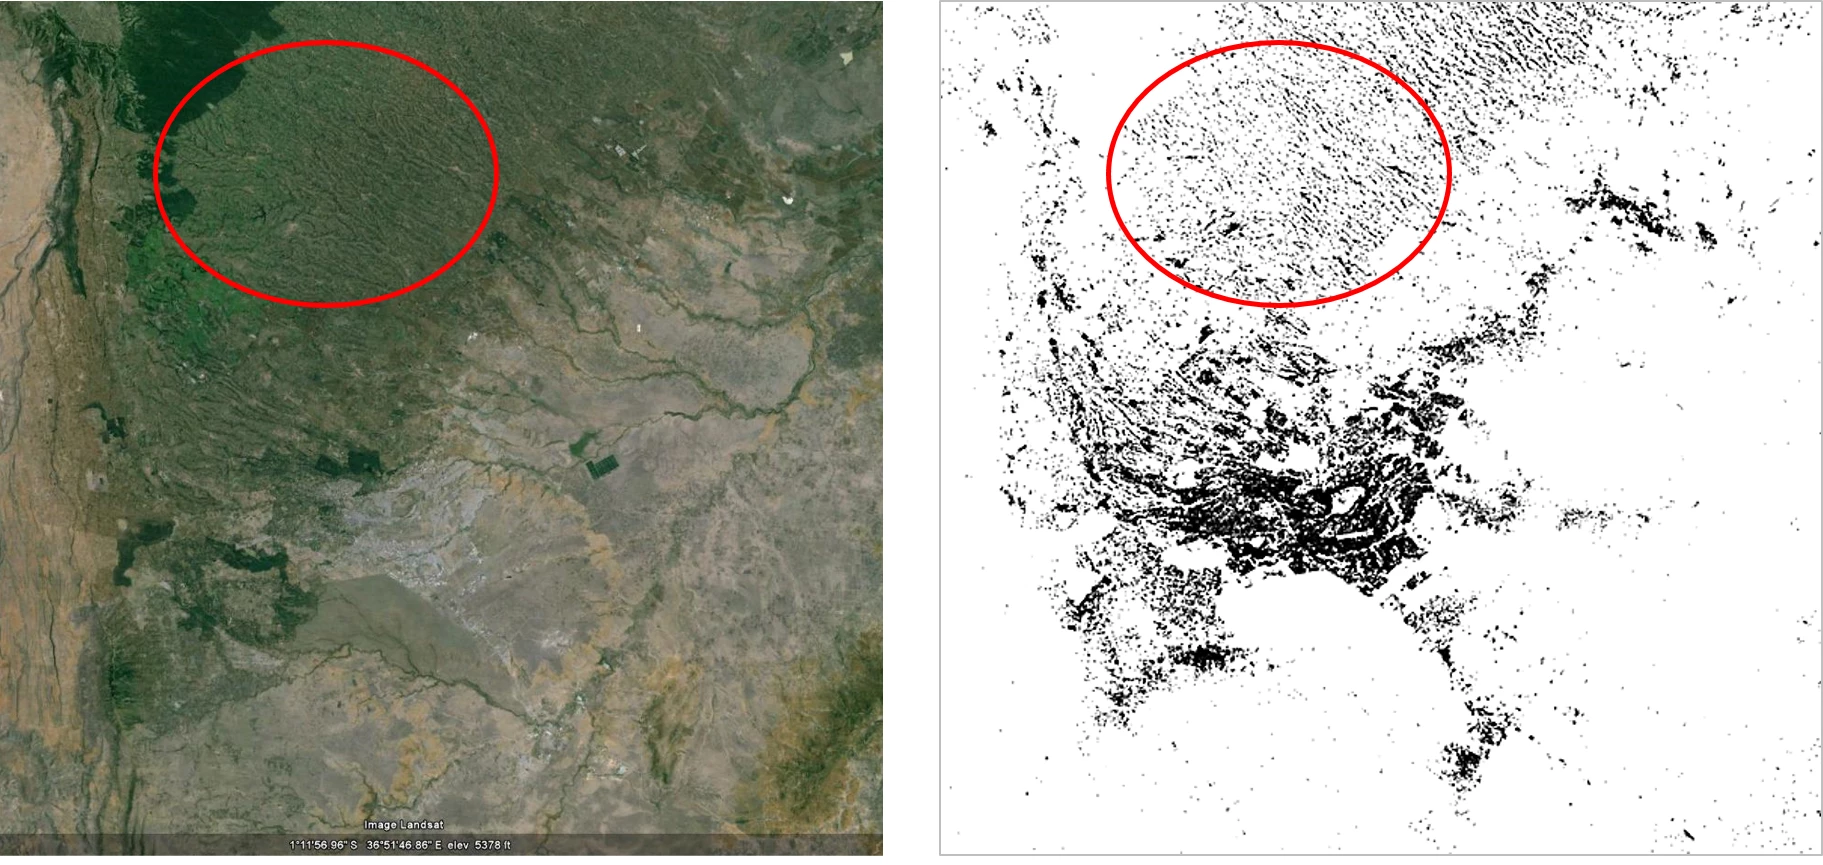 Linear settlements north of Nairobi, Kenya, which are too small or dispersed to be picked up by most maps, are clearly visible in the Global Urban Footprints map (right). Left: Google Earth, © Google 2010, Image Landsat; Right: DLR